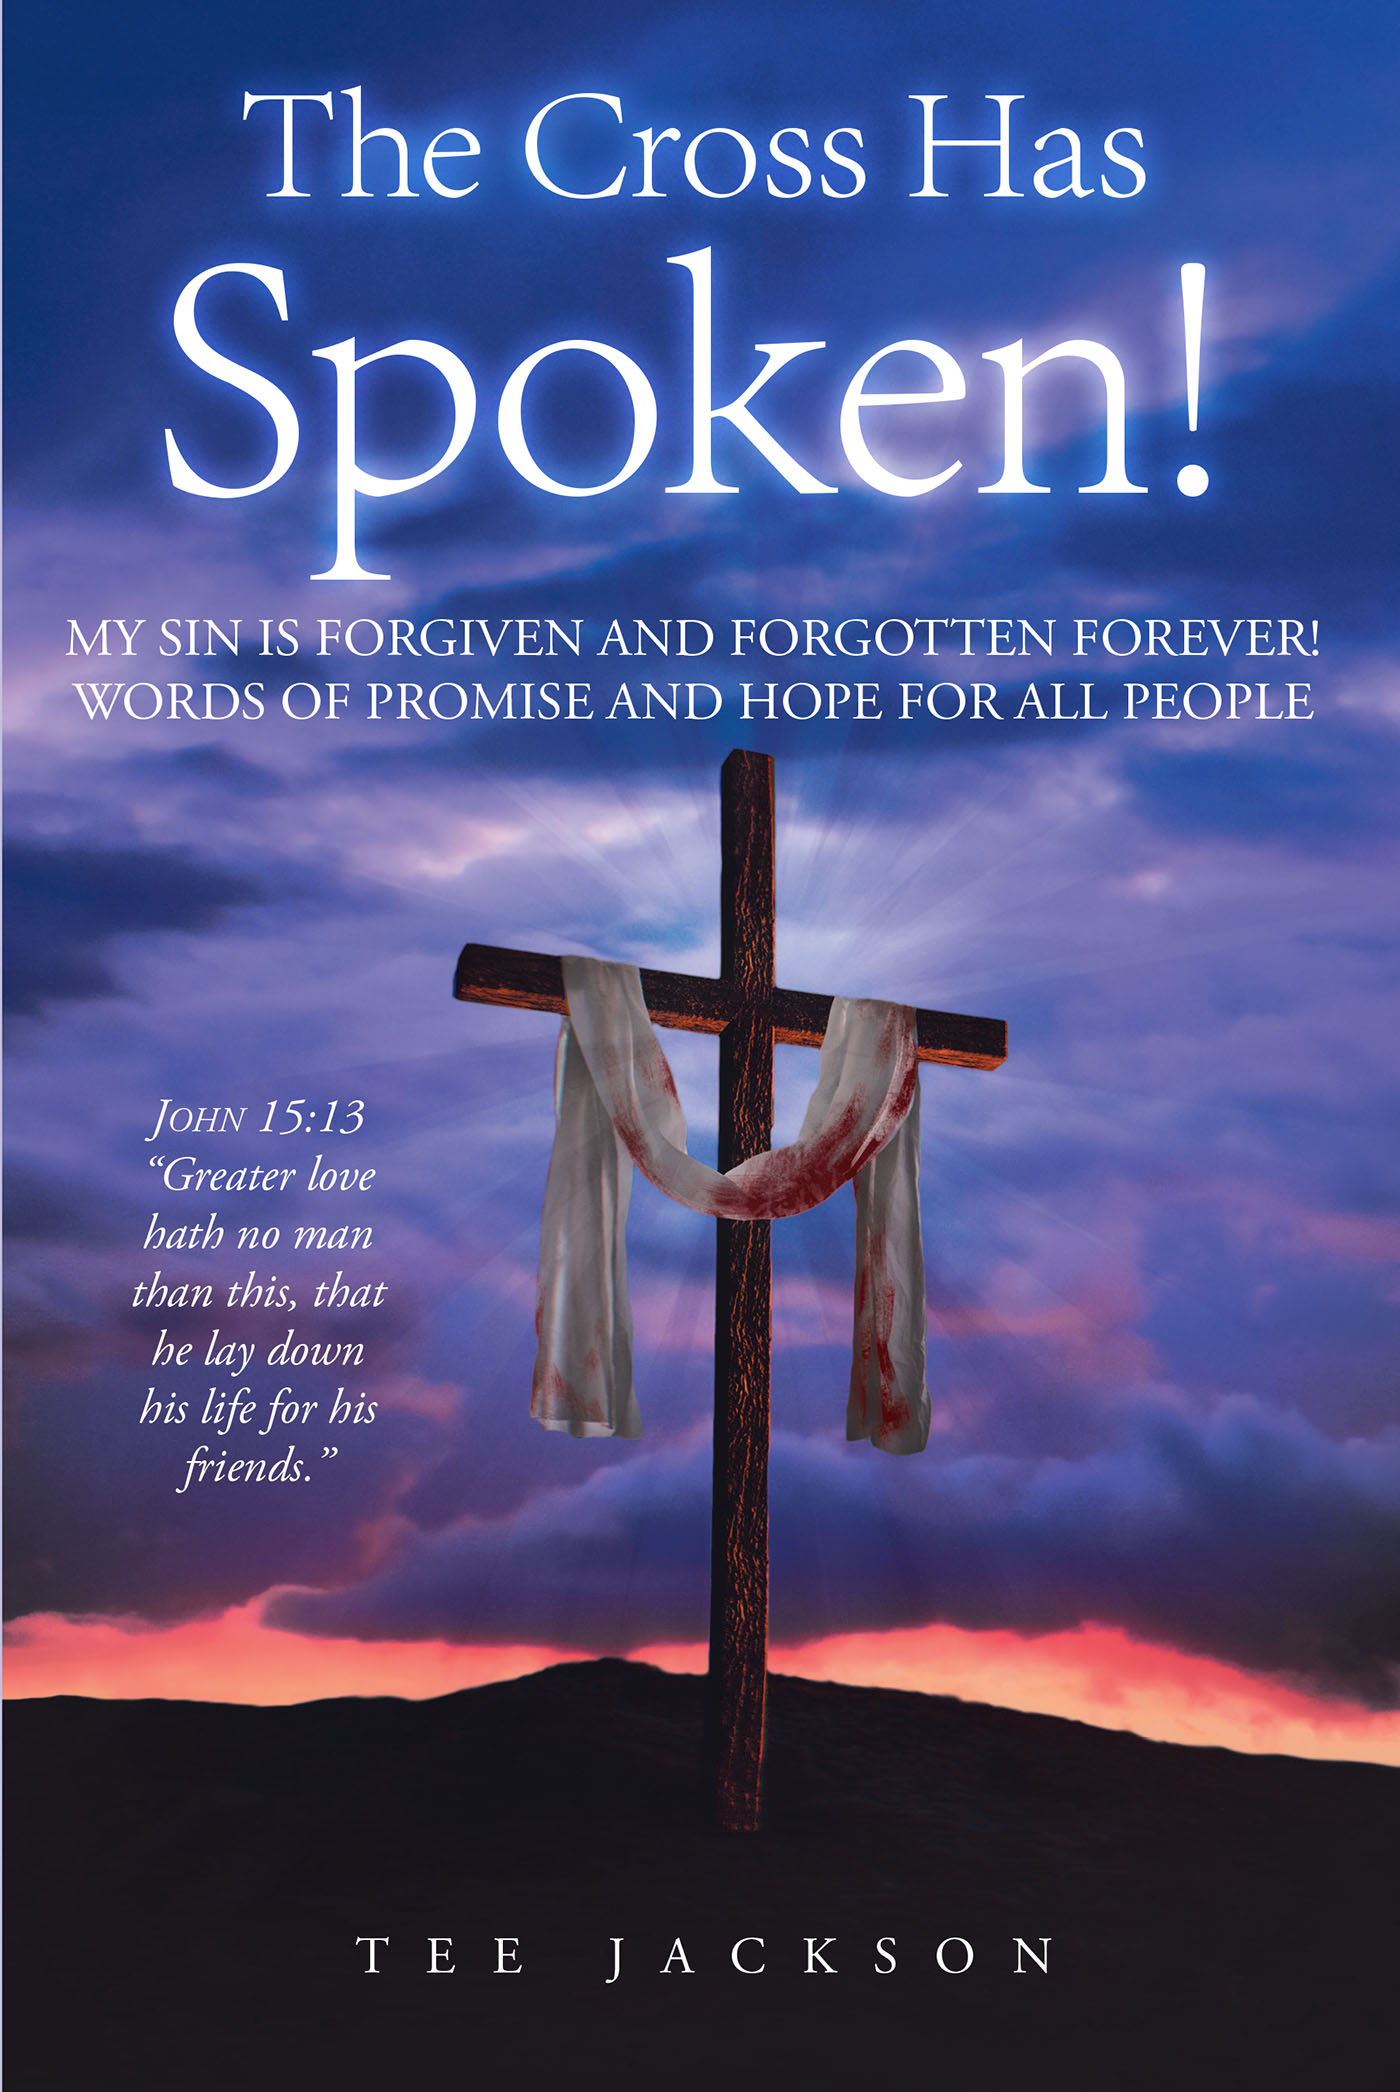 Tee Jackson’s Newly Released “The Cross Has Spoken!” is a Concise But Impactful Reminder of God’s Comforting Grace